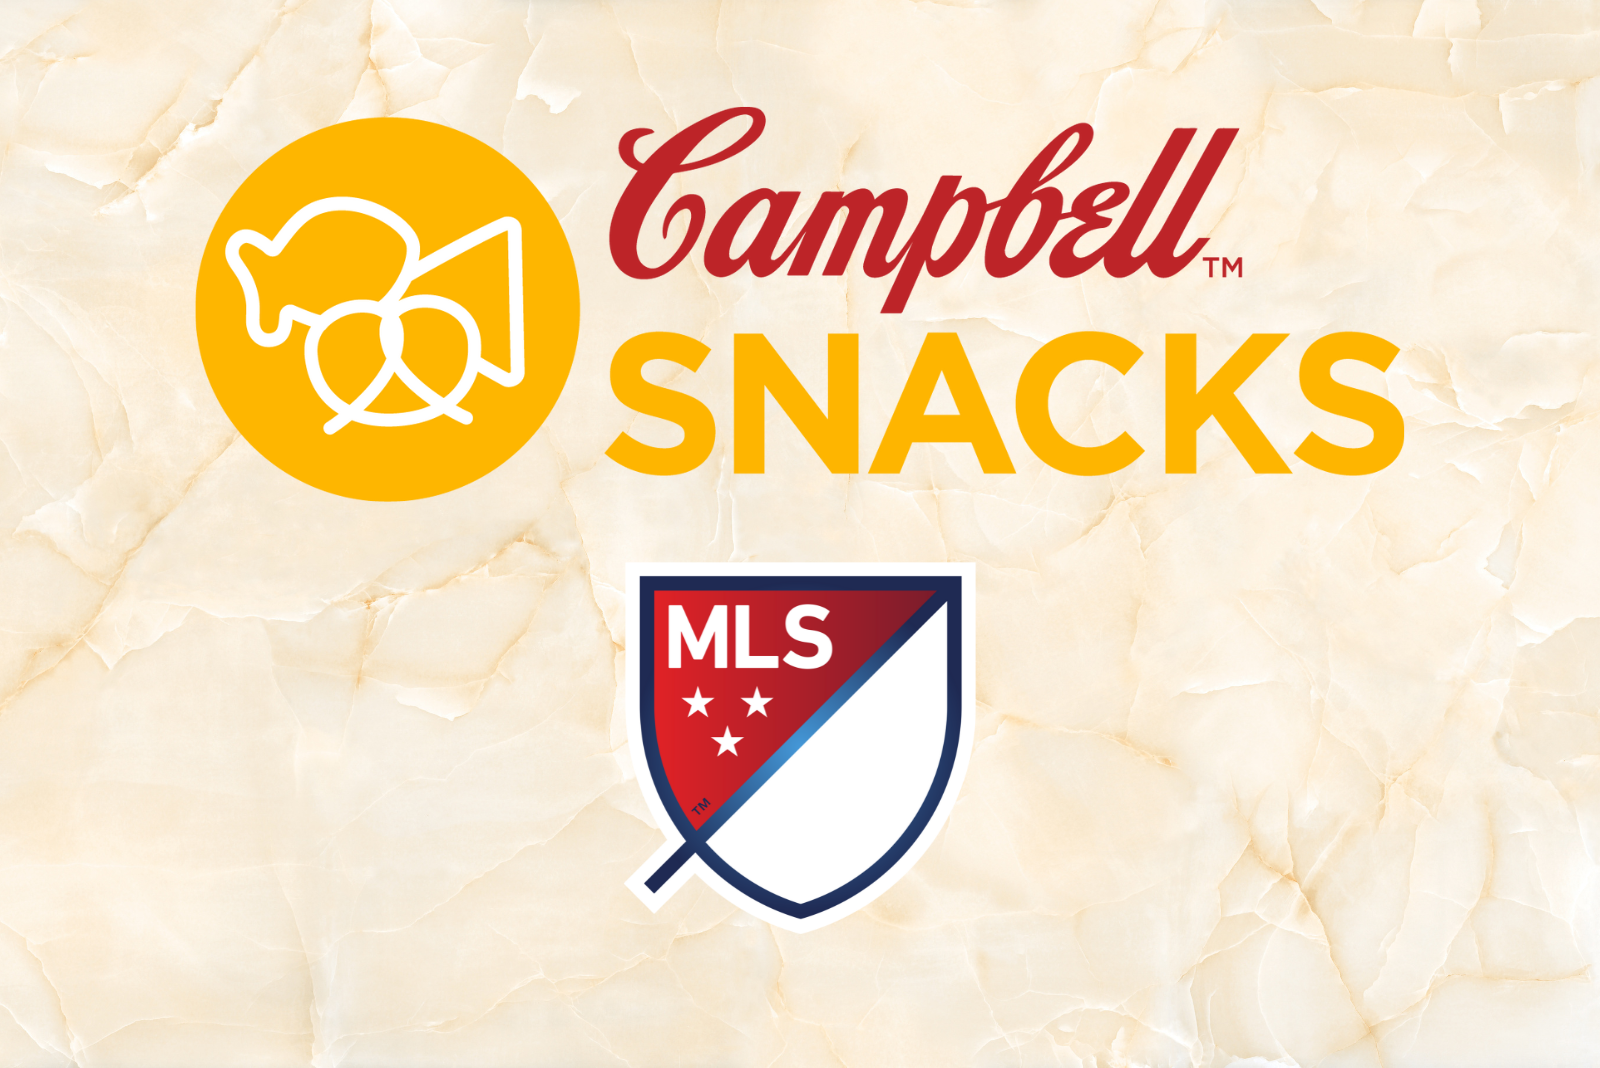 Campbell Snacks Named Official Snack Sponsors of Major League Soccer -  Campbell Soup Company